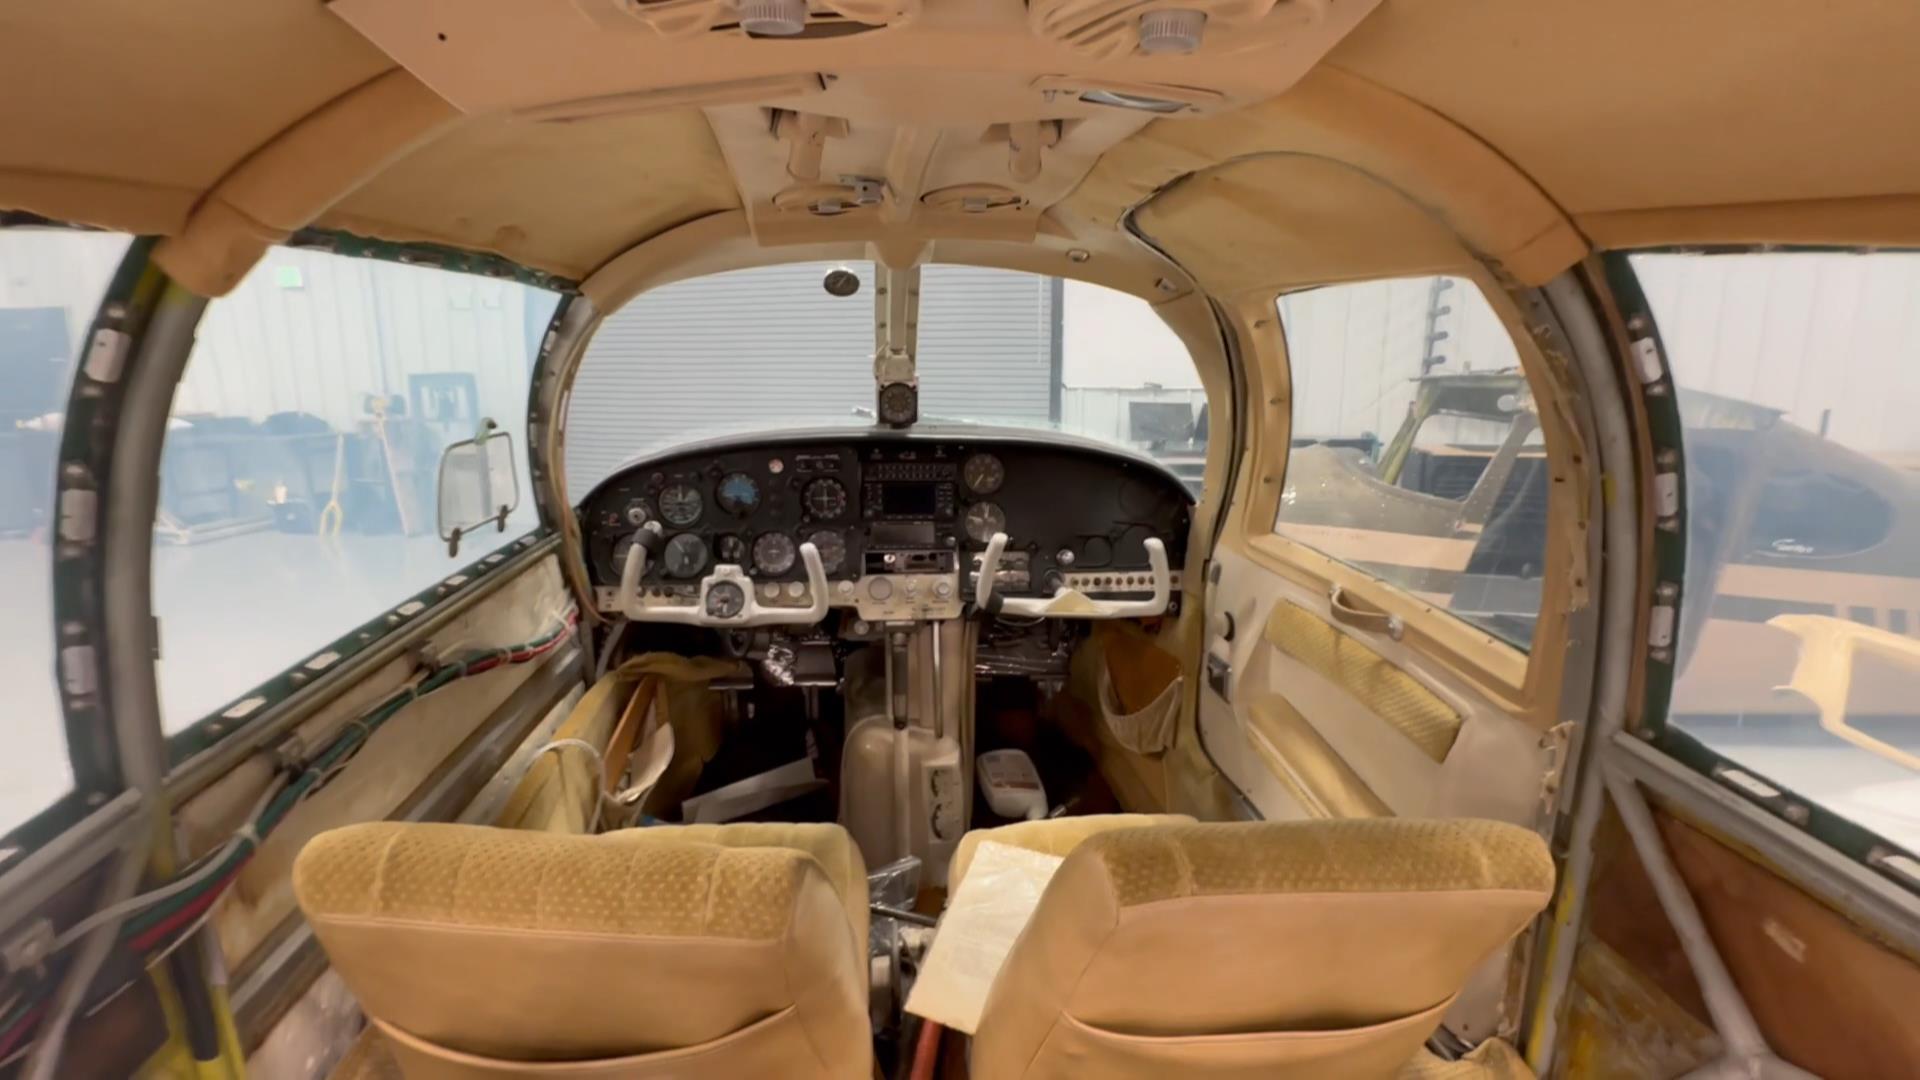 Mooney M20C interior, controls, and instrument panel from BAS Aircraft Salvage